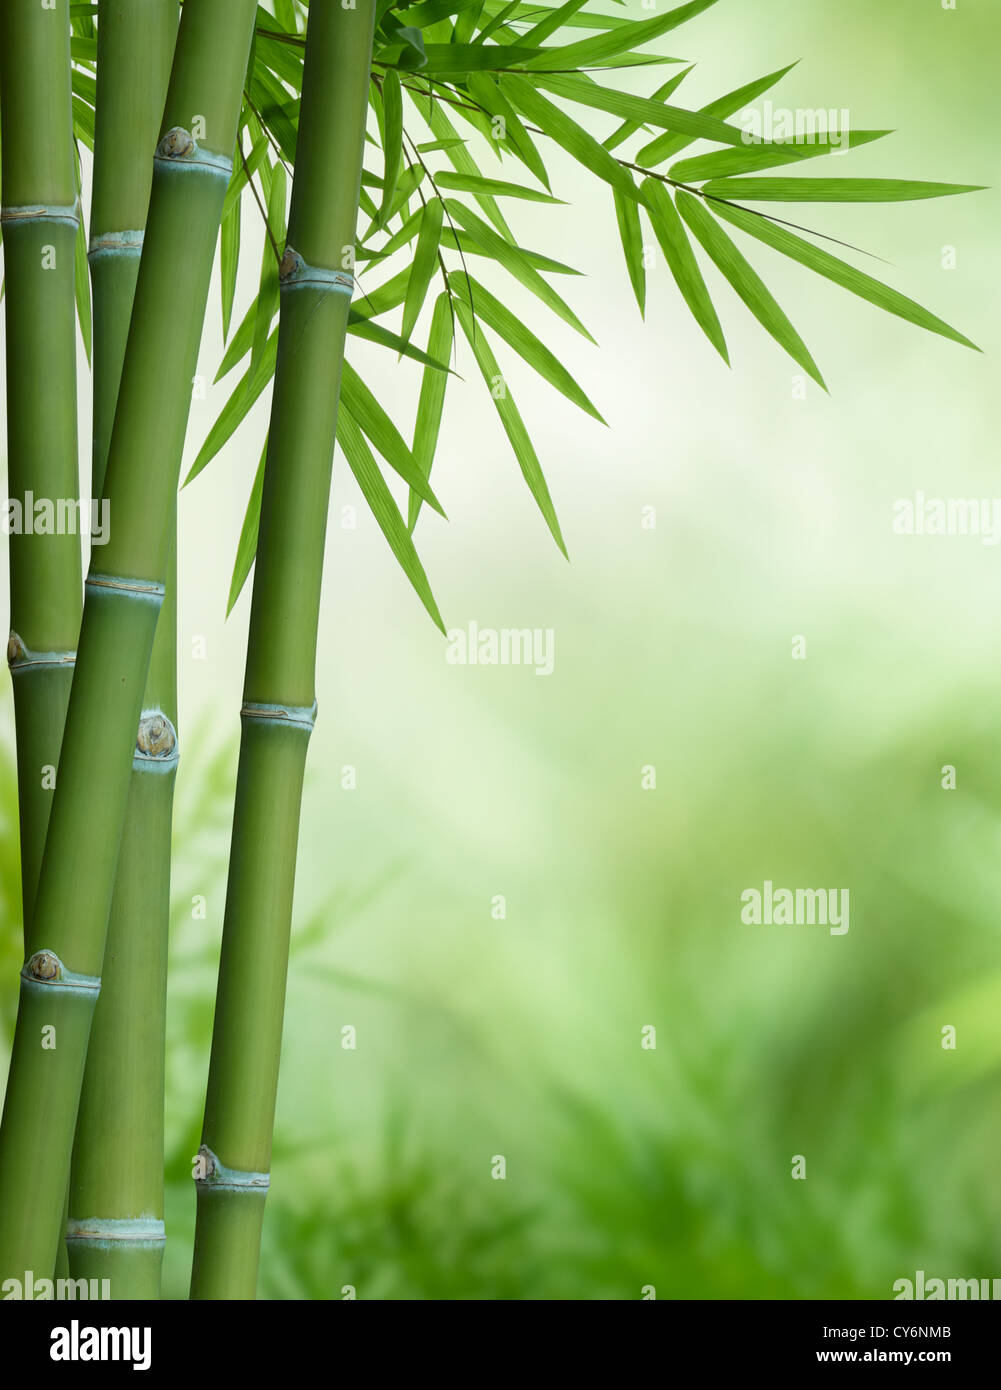 bunch of bamboo with leaves with copy space Stock Photo